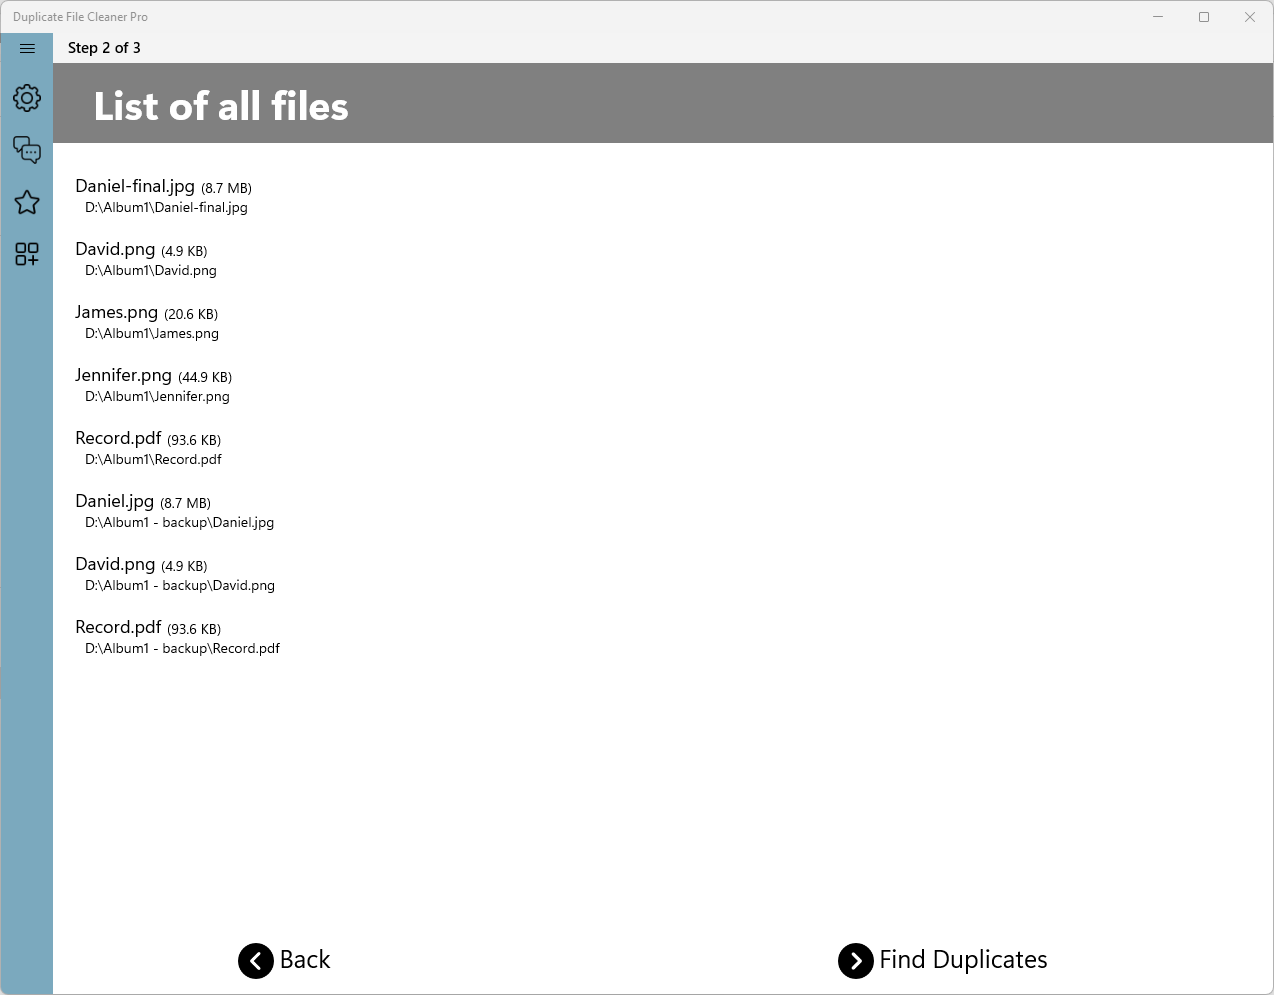 List of all files